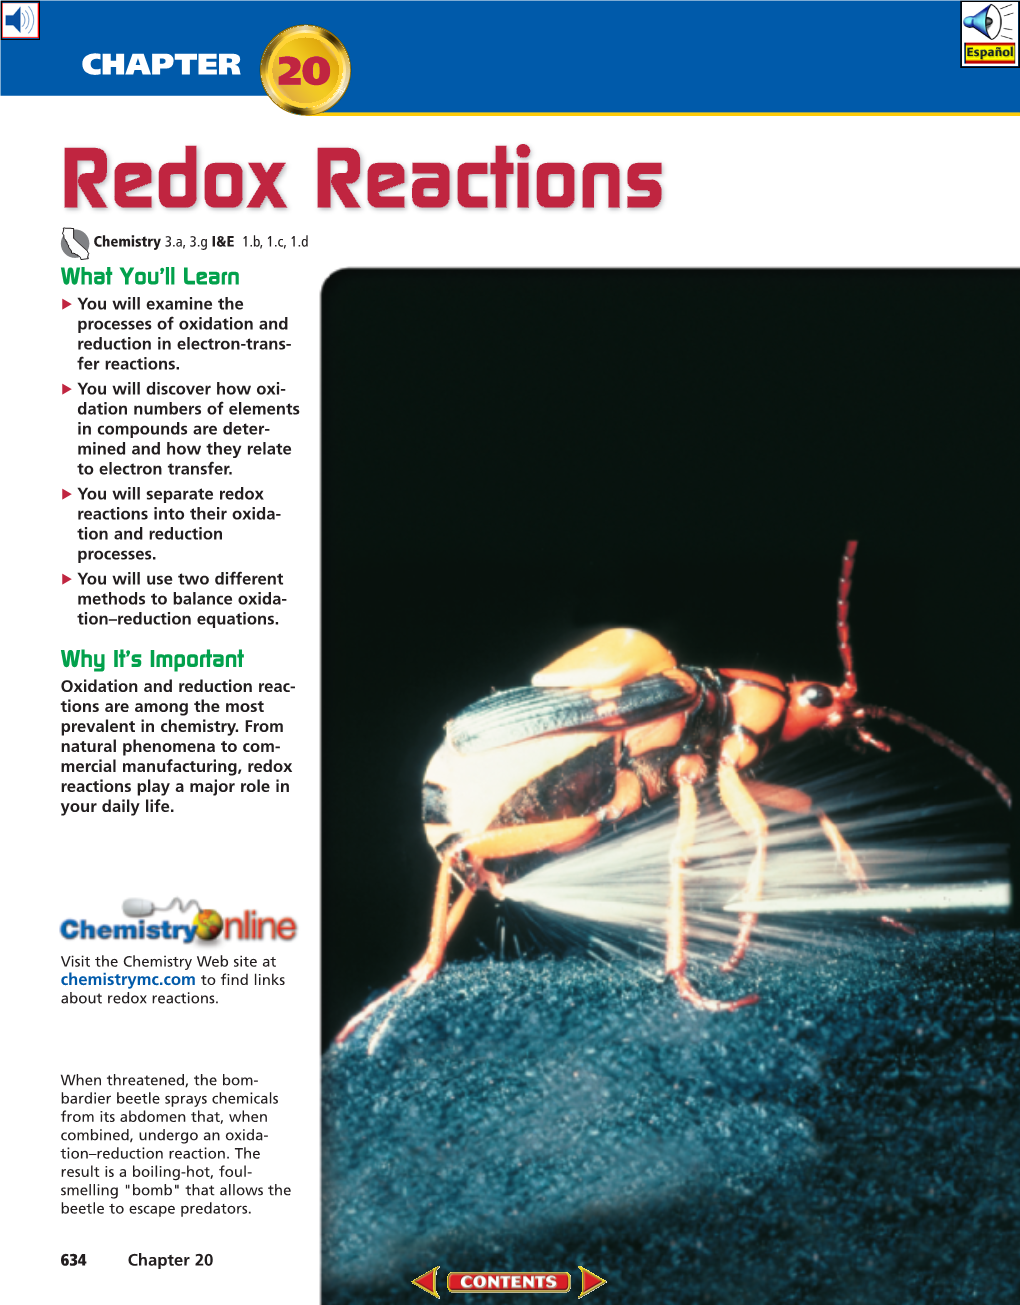 Chapter 20: Redox Reactions